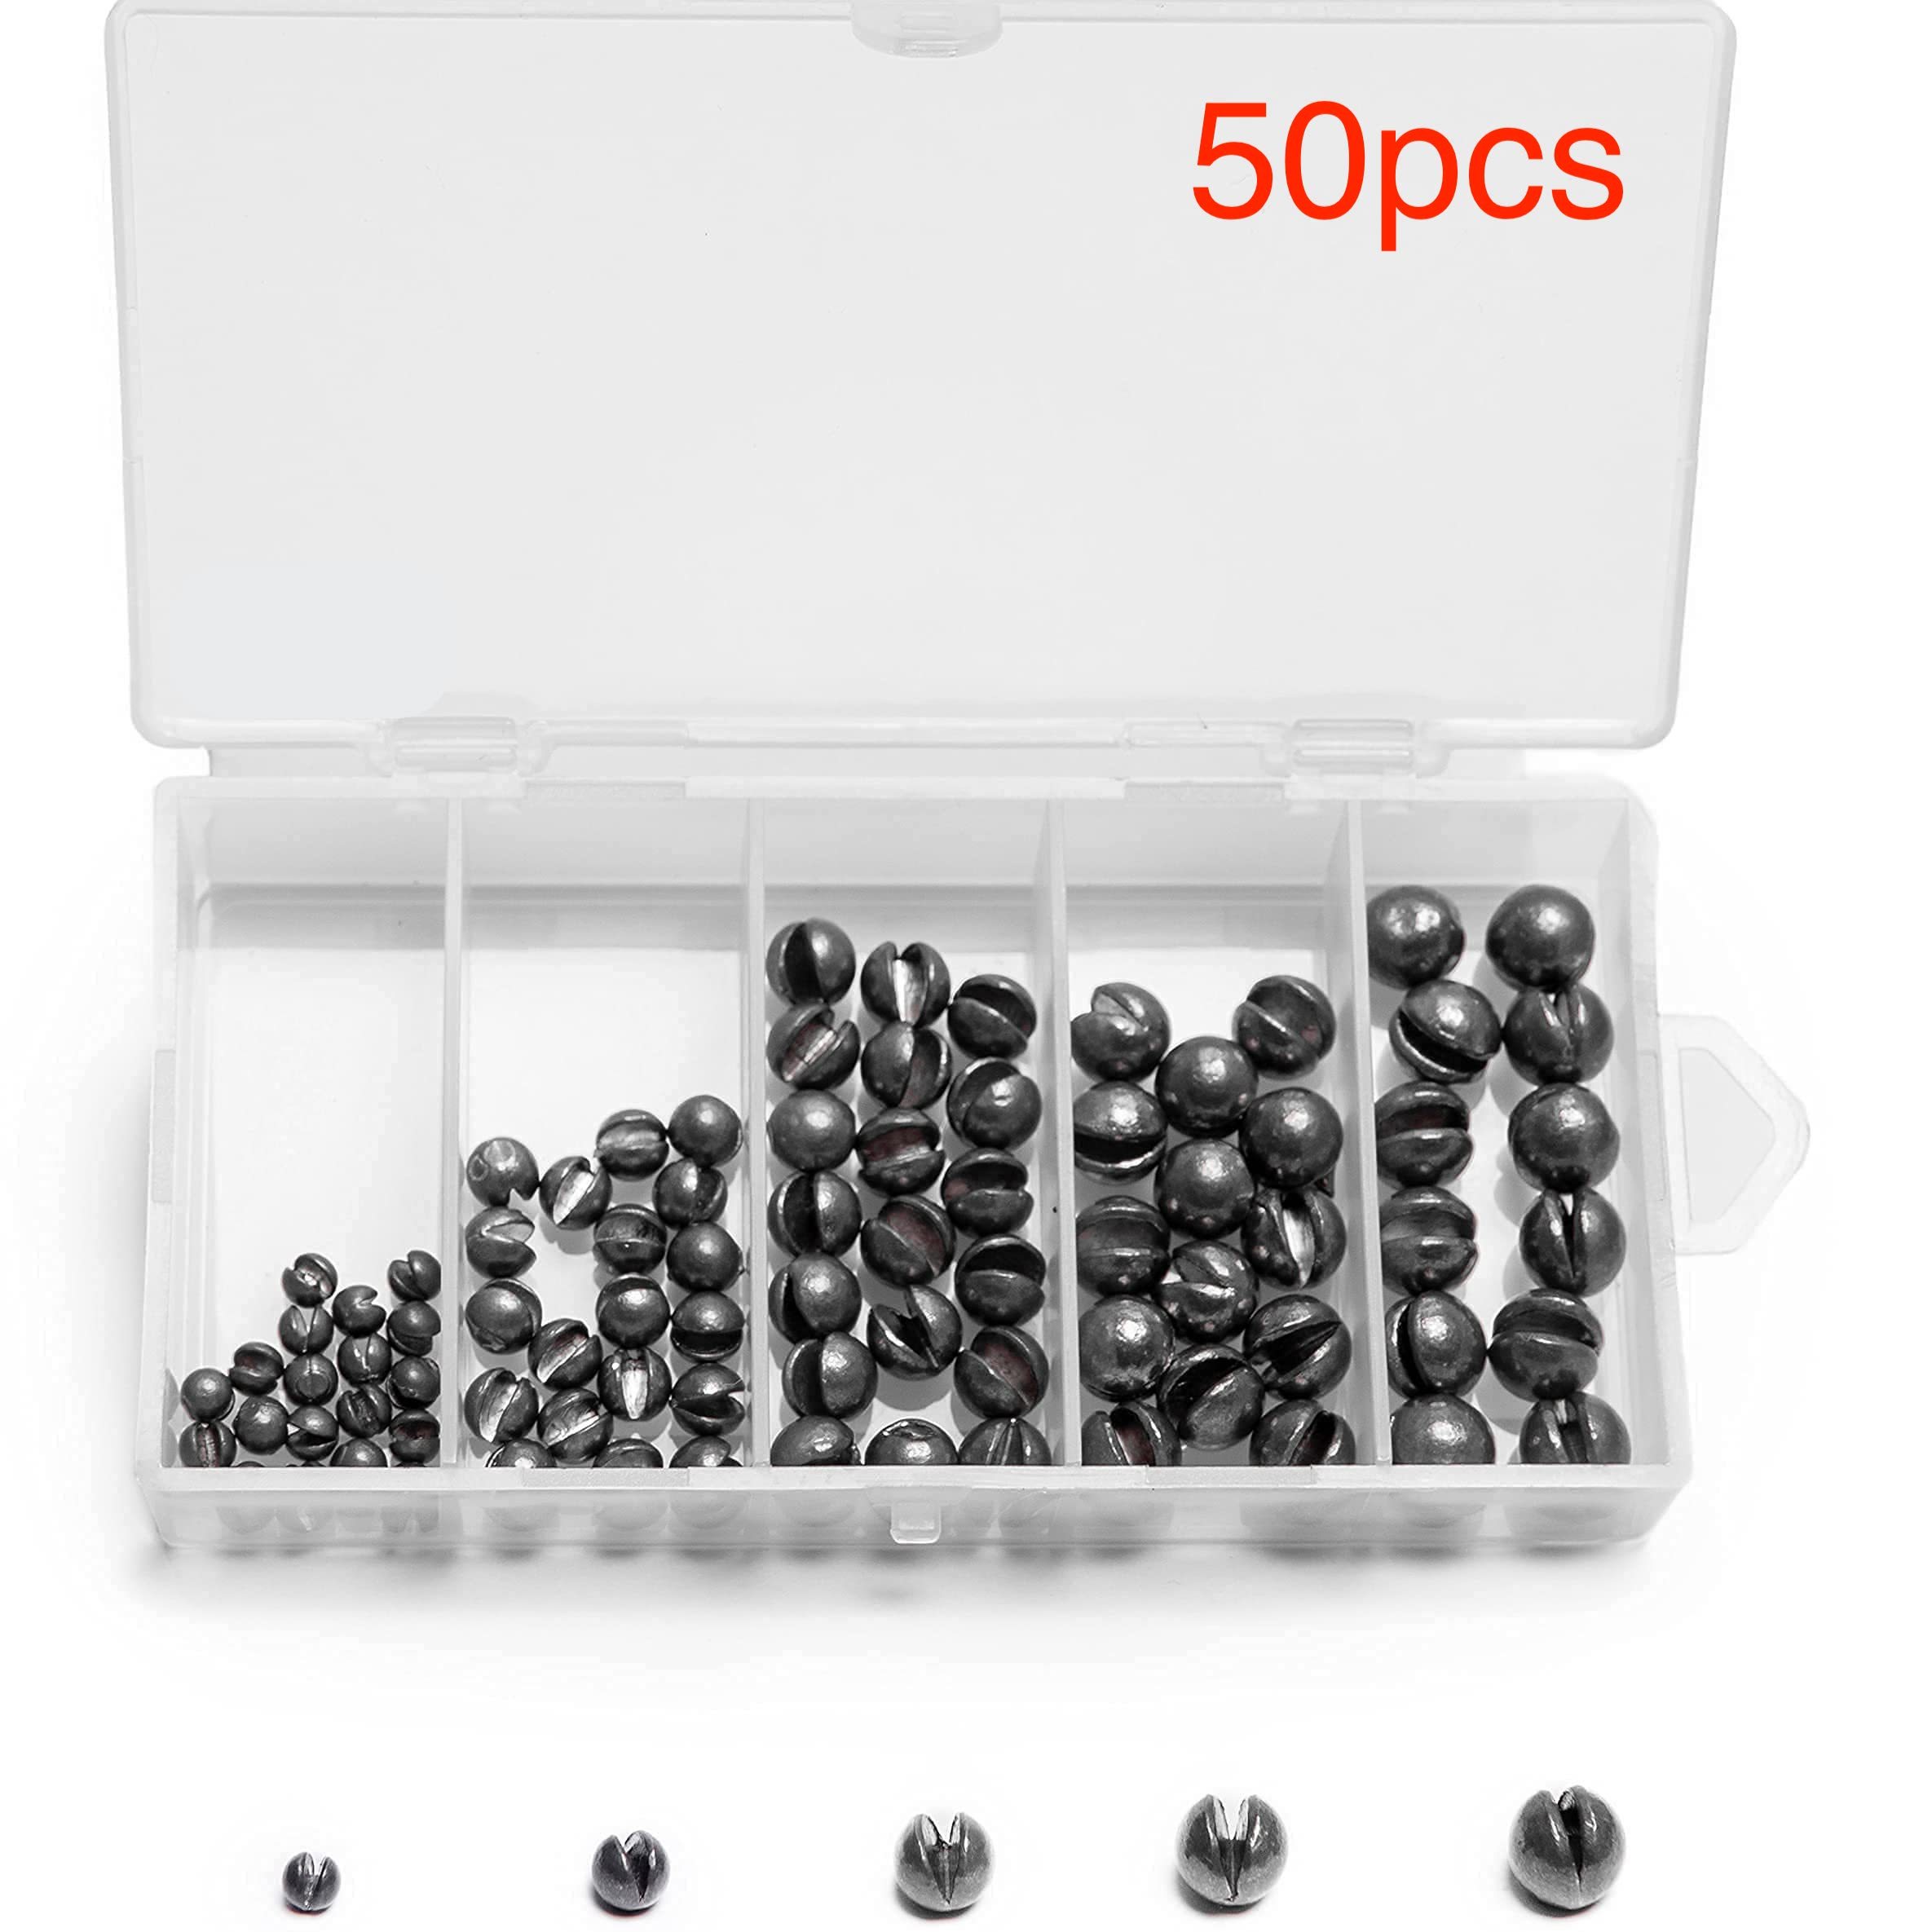  ECOFT Lead Free Fishing Sinkers and Weights Coated Egg Sinkers  Cannonball Sinkers Assorted Sizes 10g-200g in Bag and Fishing Weights  Sinkers Assortment Box Drop Shot for Saltwater Freshwater : Sports